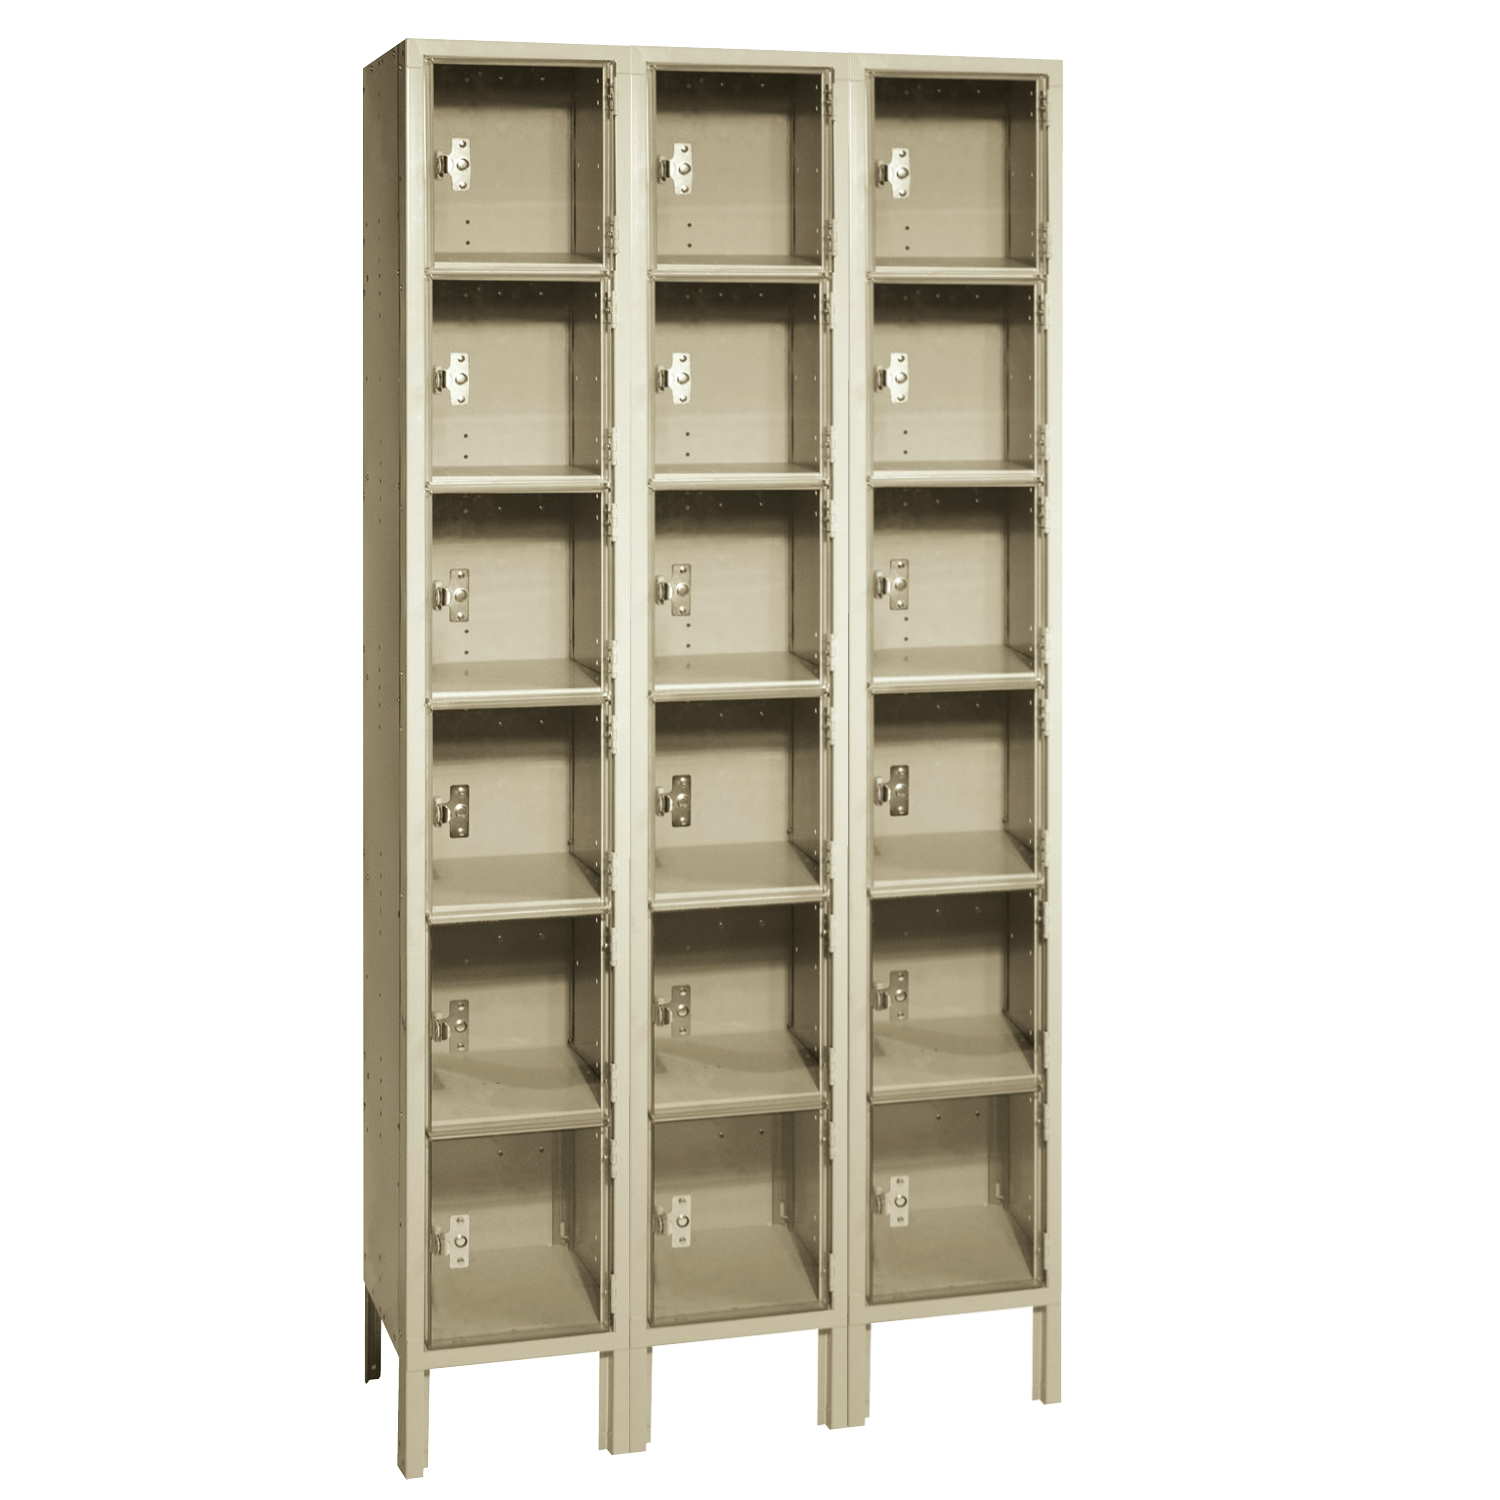 3-Point Locking System with 2 Keys Steel Room Decor 35.4x15.7x70.9 Gray Tidyard Office Locker Cabinet Wardrobe Storage with 6 Compartments /& 2 Doors